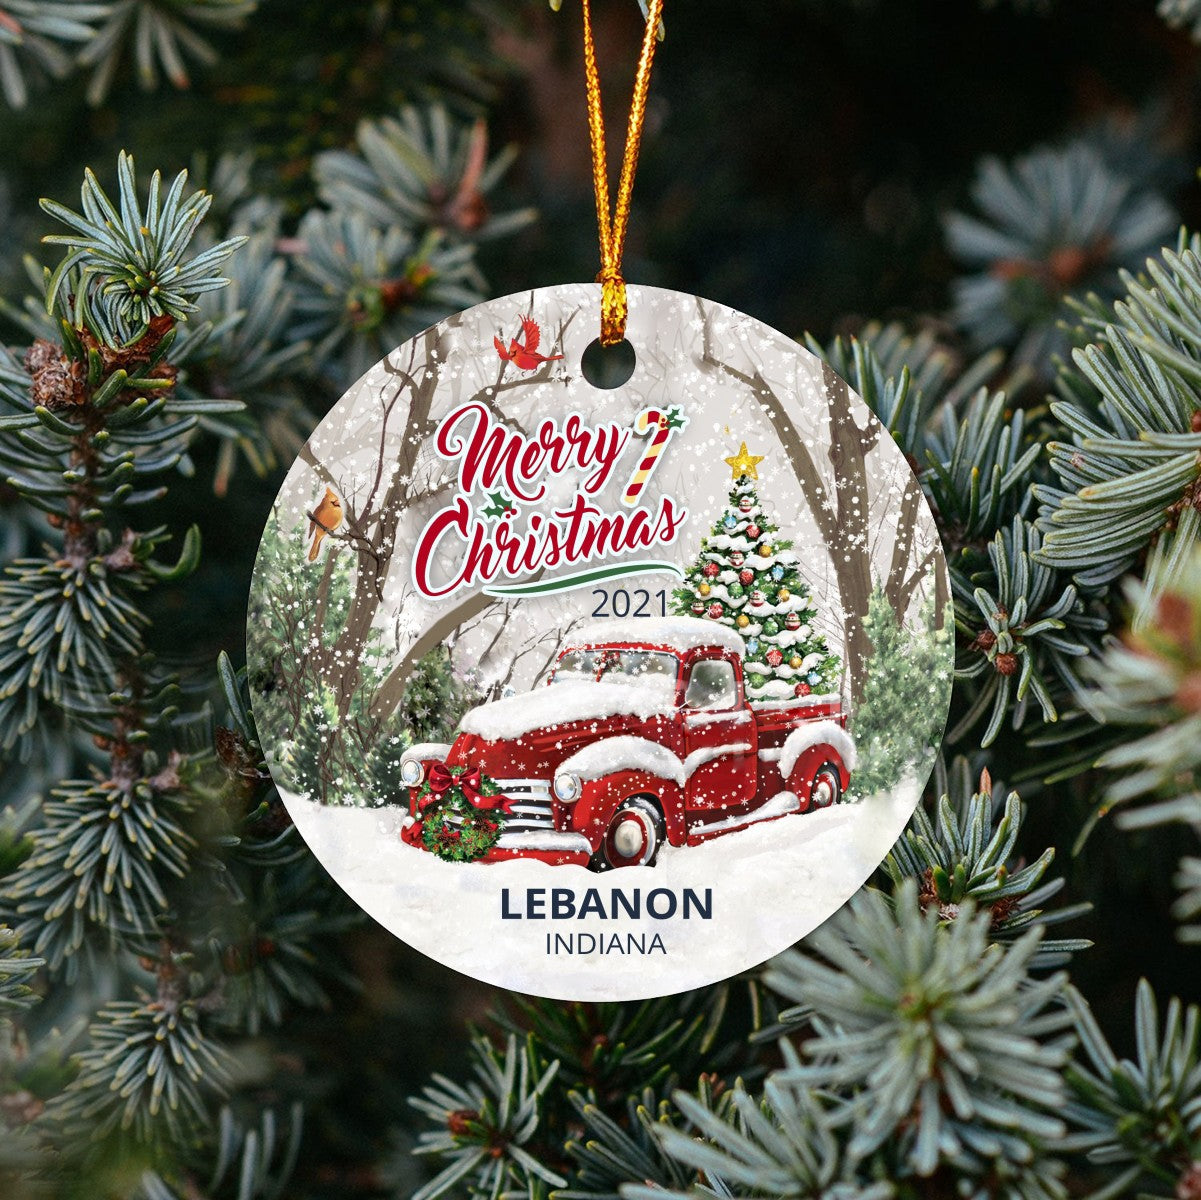 Christmas Tree Ornaments Lebanon - Ornament Customize With Name City And State Lebanon Indiana IN - Red Truck Xmas Ornaments 3'' Plastic Gift For Family, Friend And Housewarming